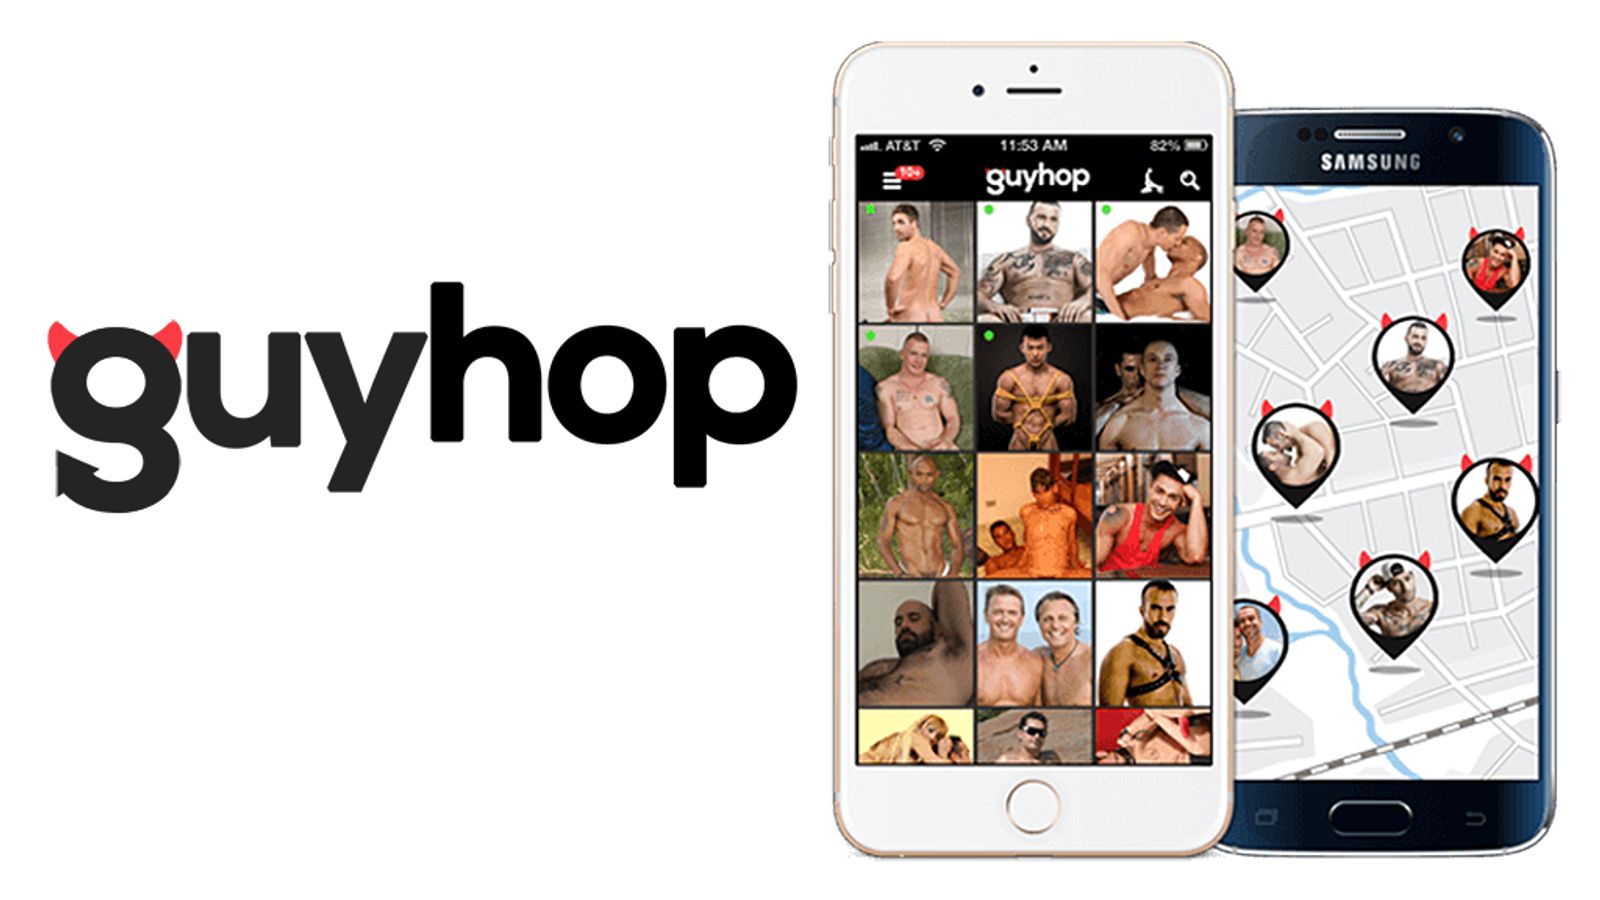 No More Craigslist Personals? Try Guyhop, The Gay Hookup App